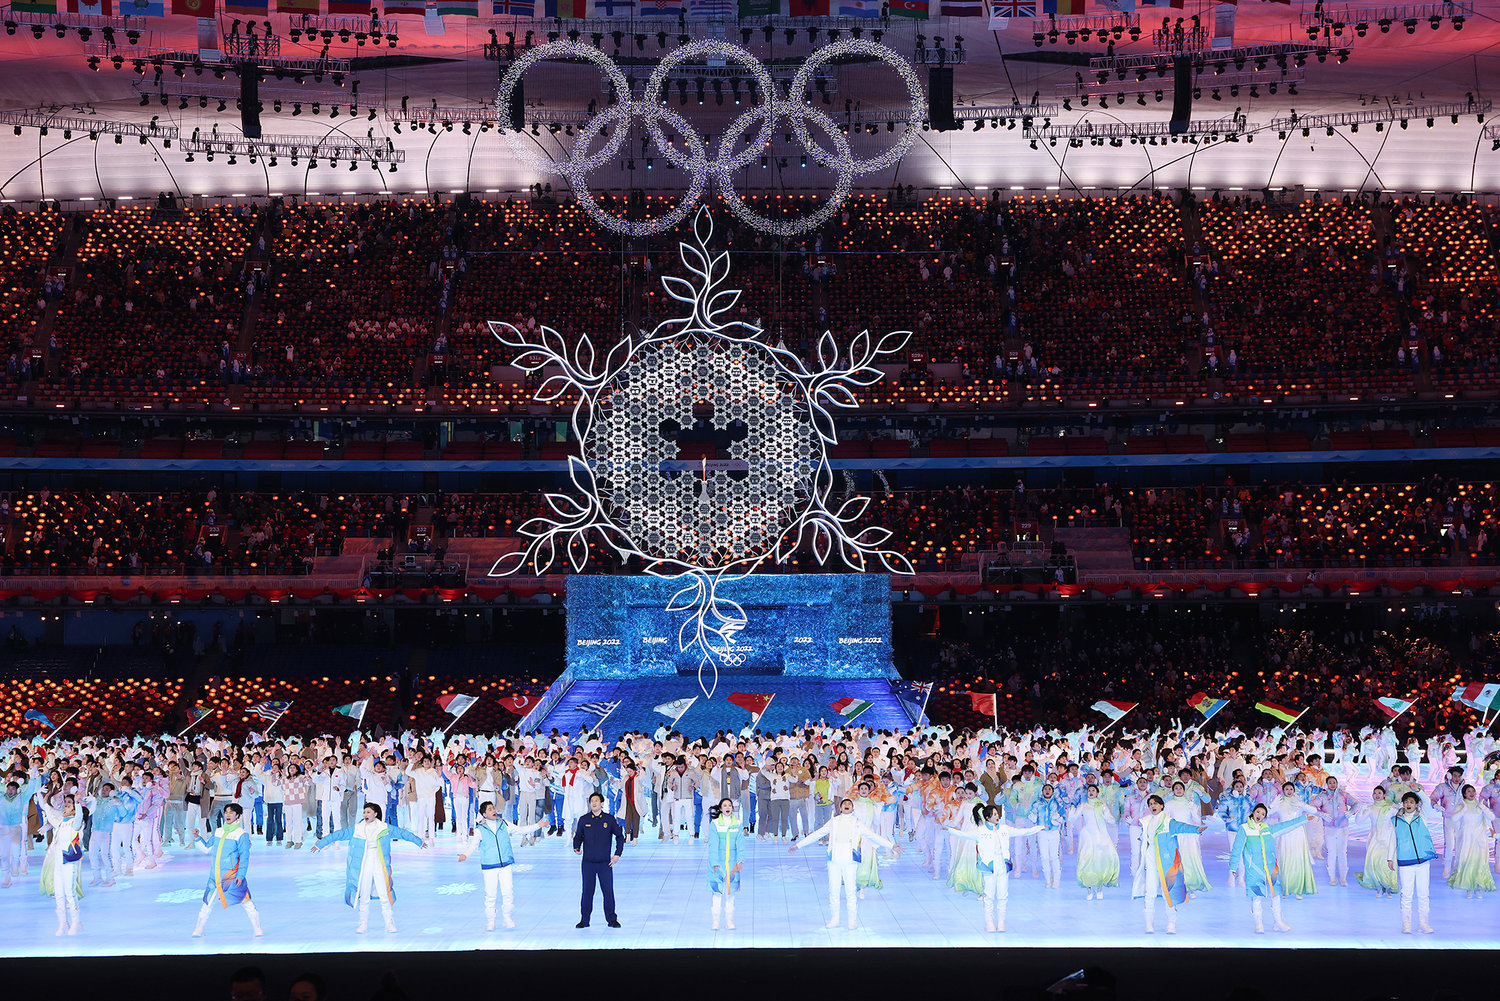 The Olympic Cauldron and rings are seen as performers dance during the Beijing 2022 Winter Olympics Closing Ceremony on Day 16 of the Beijing 2022 Winter Olympics at Beijing National Stadium on Feb. 20, 2022, in Beijing. (Lintao Zhang/Getty Images/TNS)